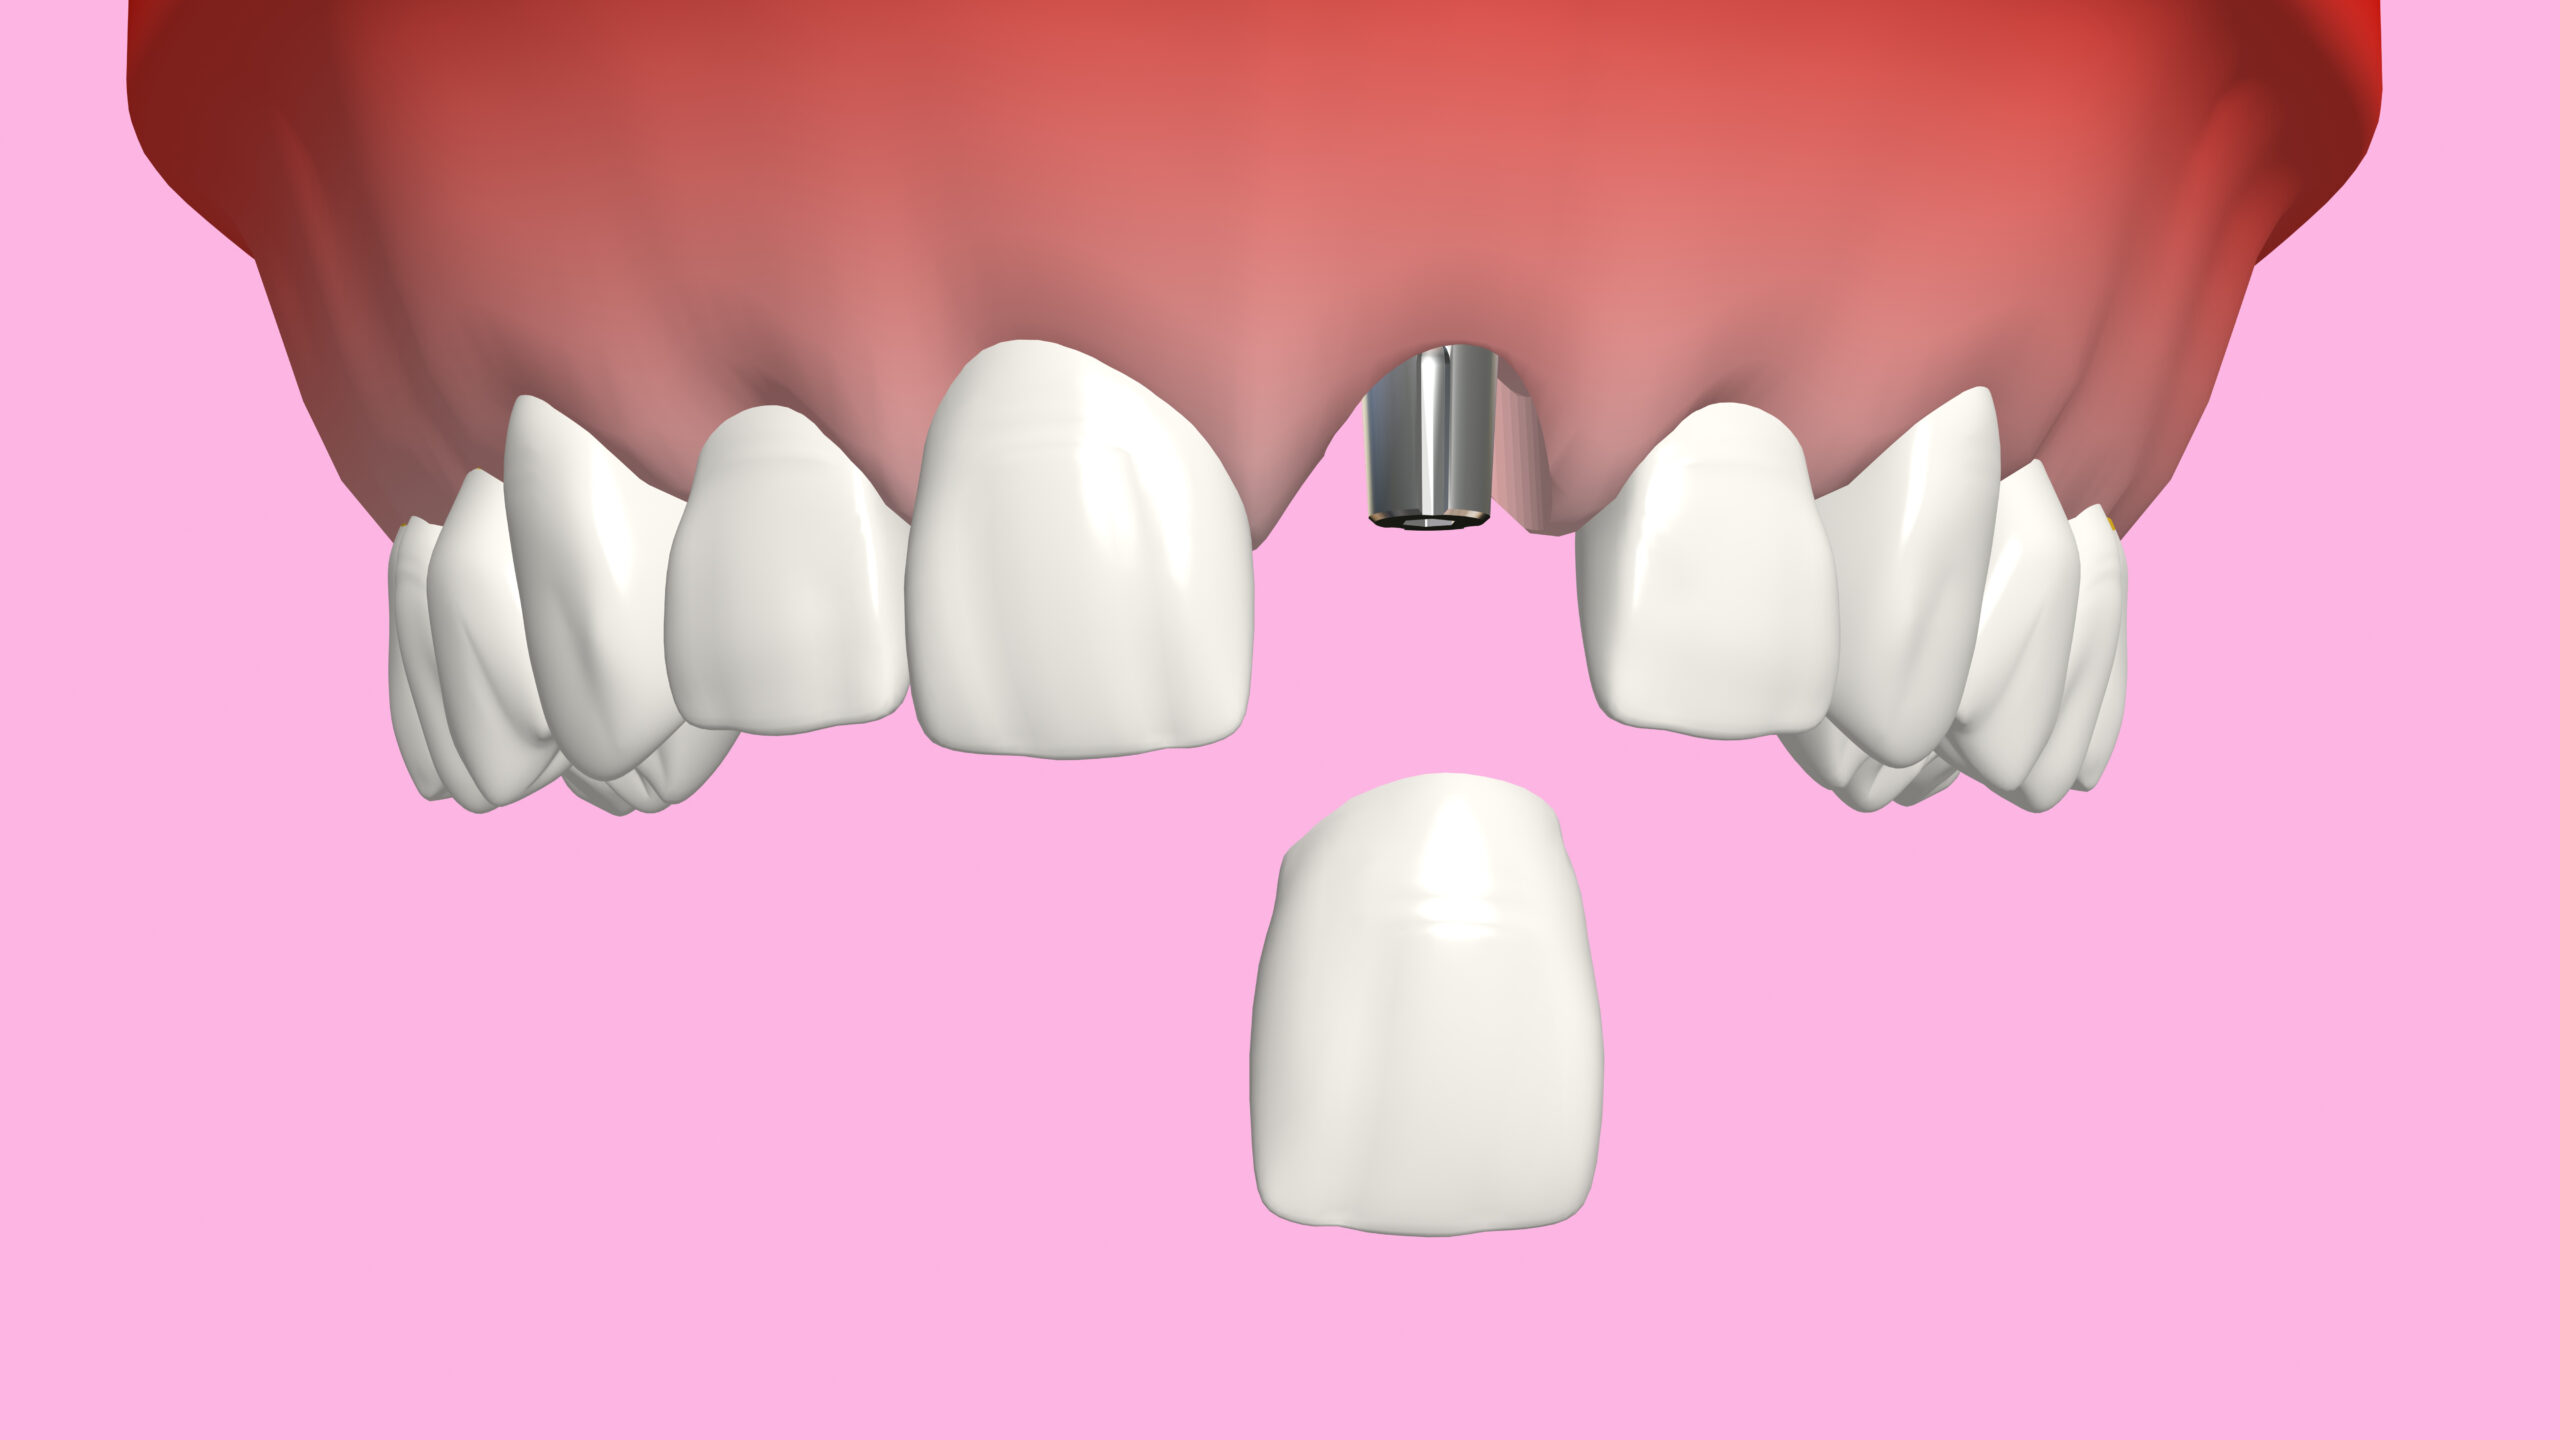 Are You A Candidate For Dental Implants?